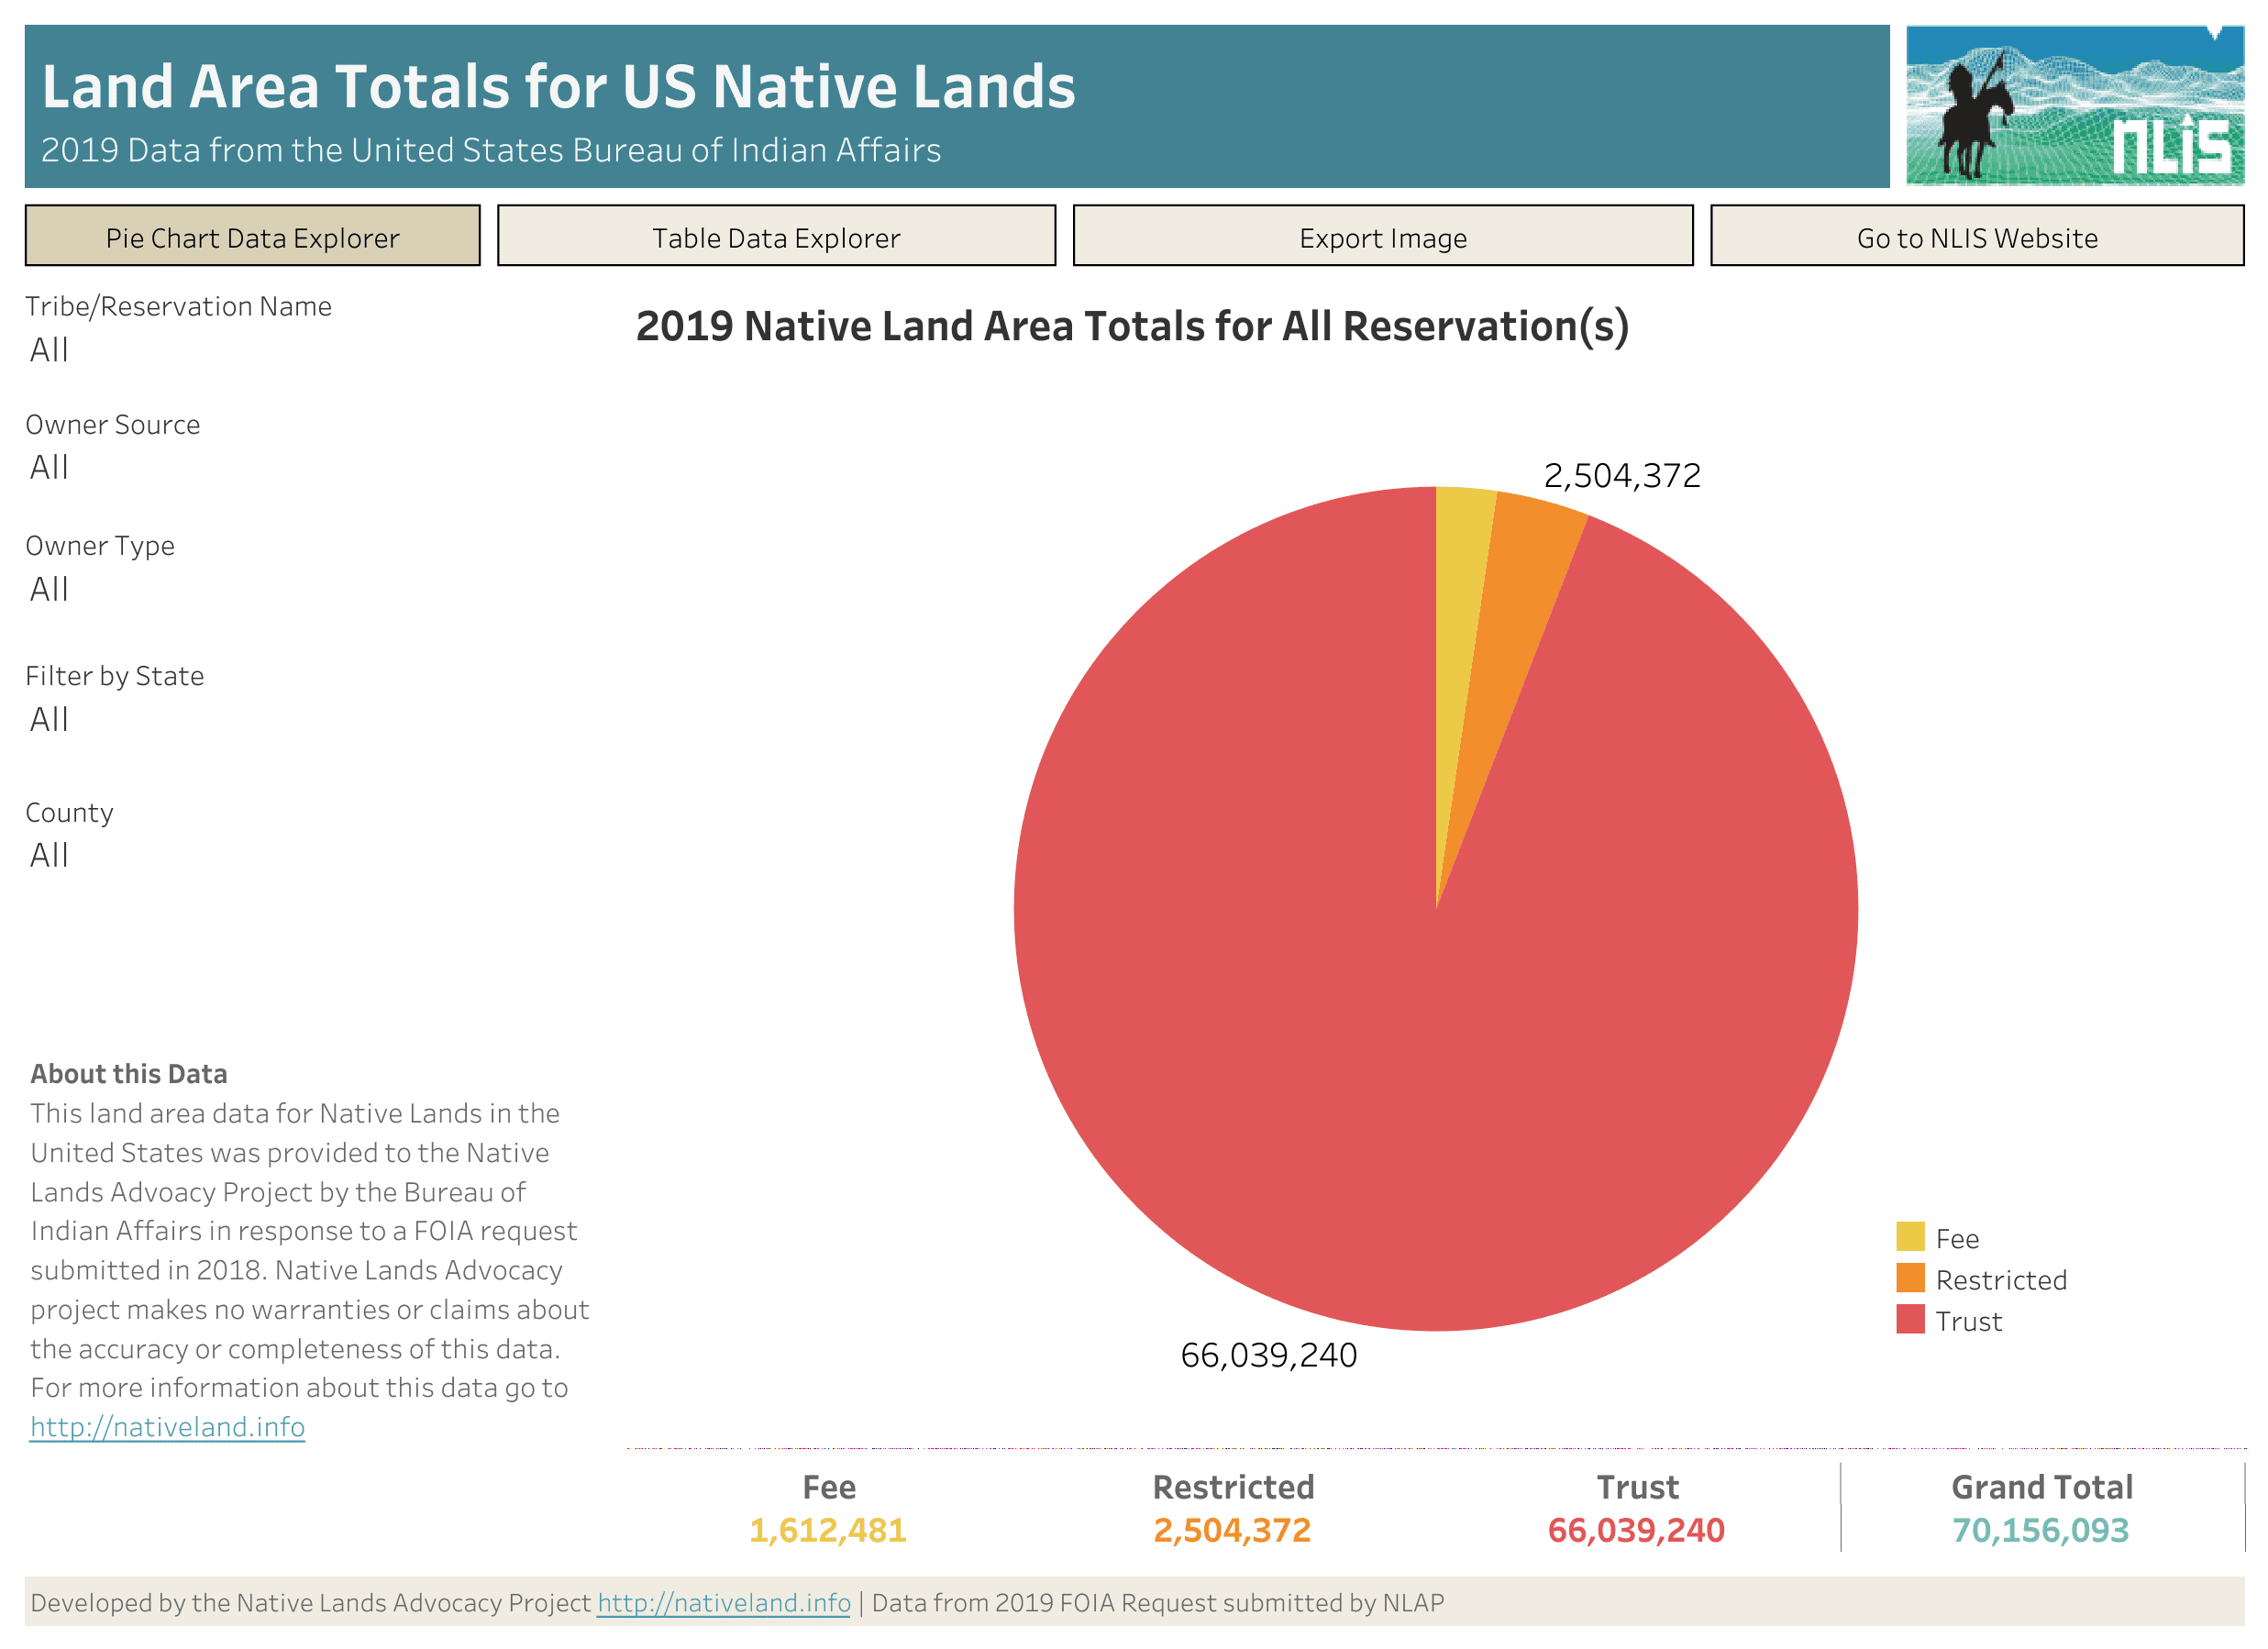 Bureau of Indian Affairs Land Area Totals for US Native Lands